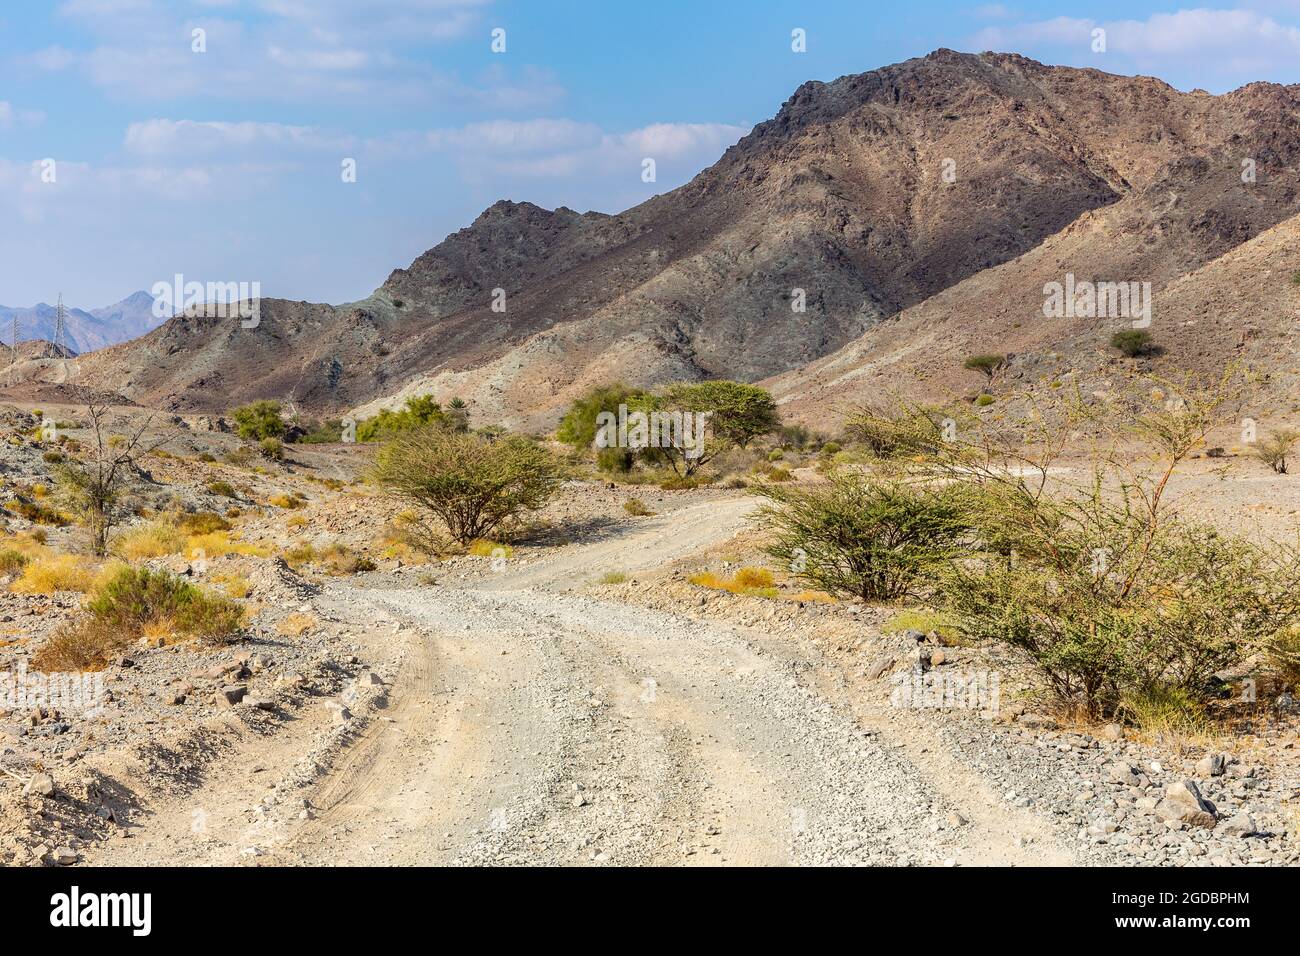 Copper Hike trail, winding gravel dirt road through Wadi Ghargur riverbed and rocky limestone Hajar Mountains in Hatta, United Arab Emirates. Stock Photo